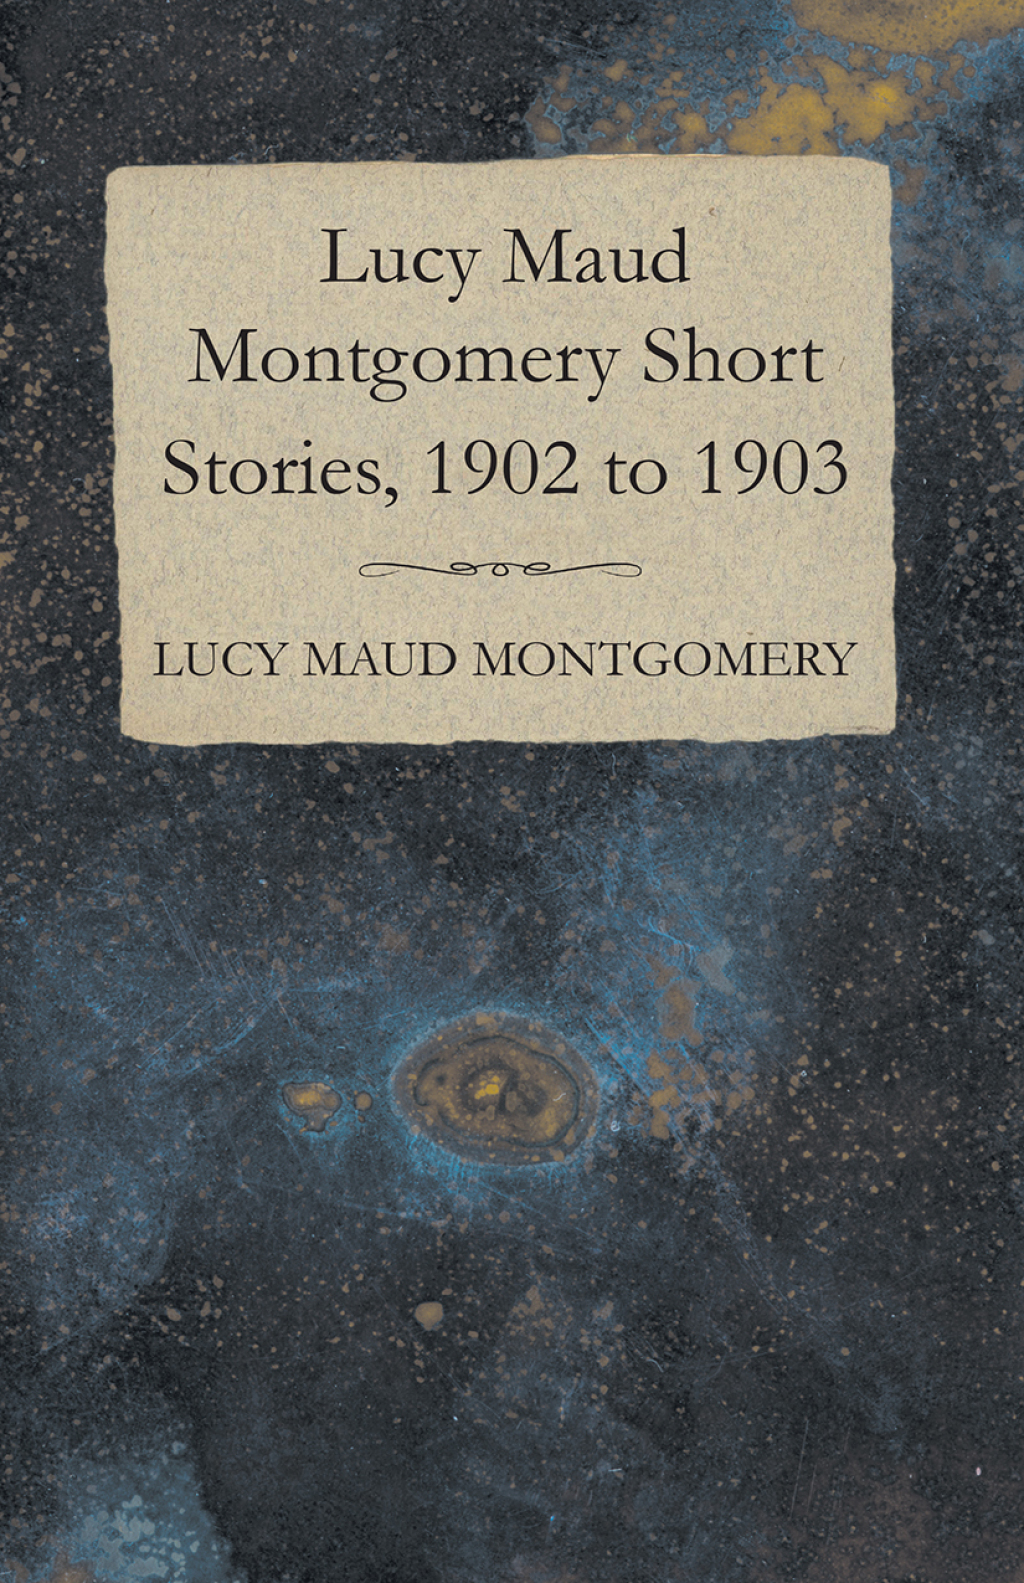 Lucy Maud Montgomery Short Stories  1902 to 1903 (eBook) - Lucy Maud Montgomery,